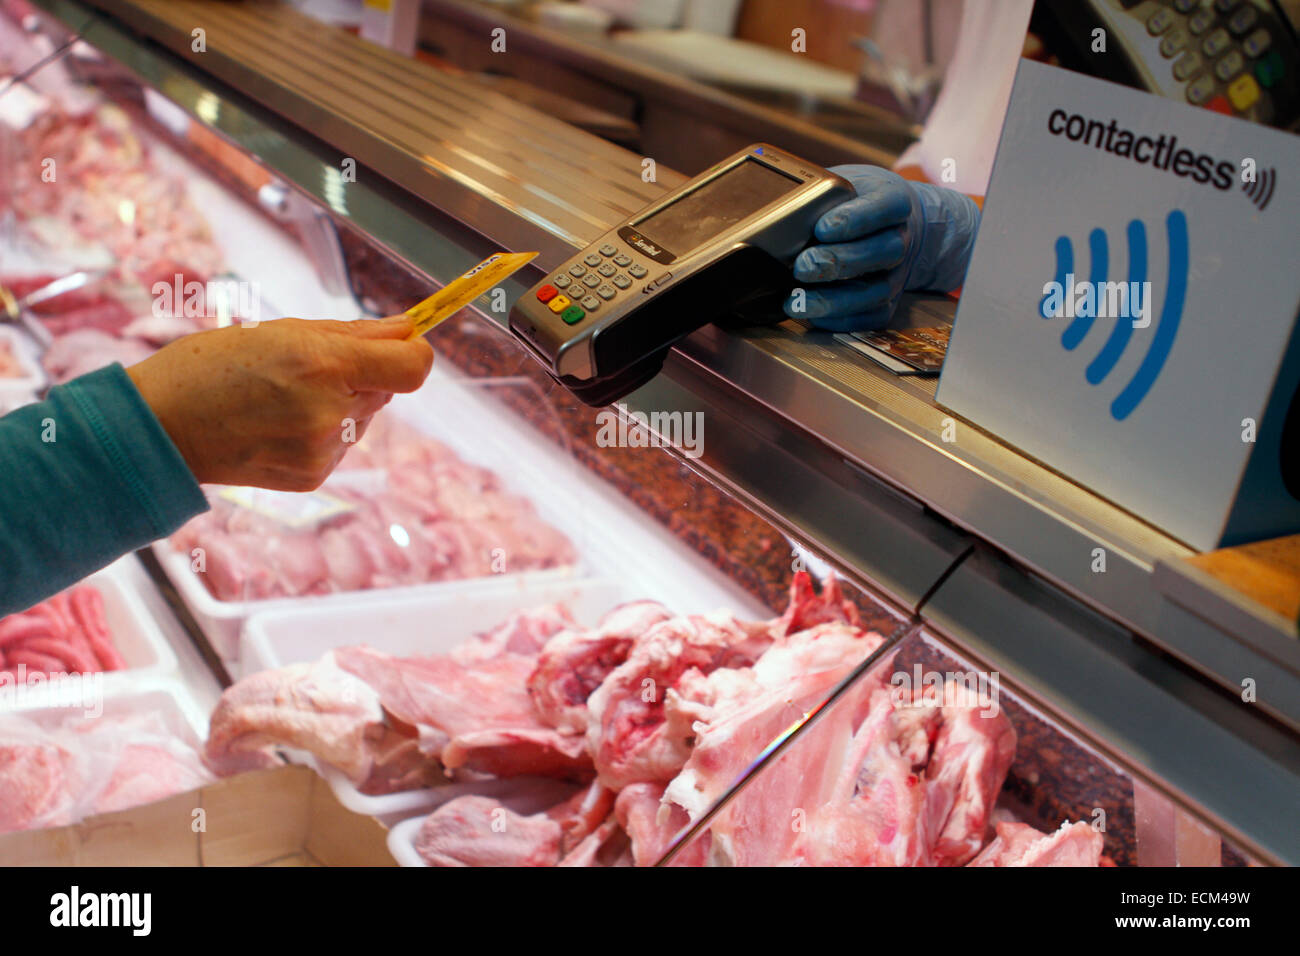 A woman pays on a butchery with a contactless credit card system in the island of Majorca, Spain Stock Photo